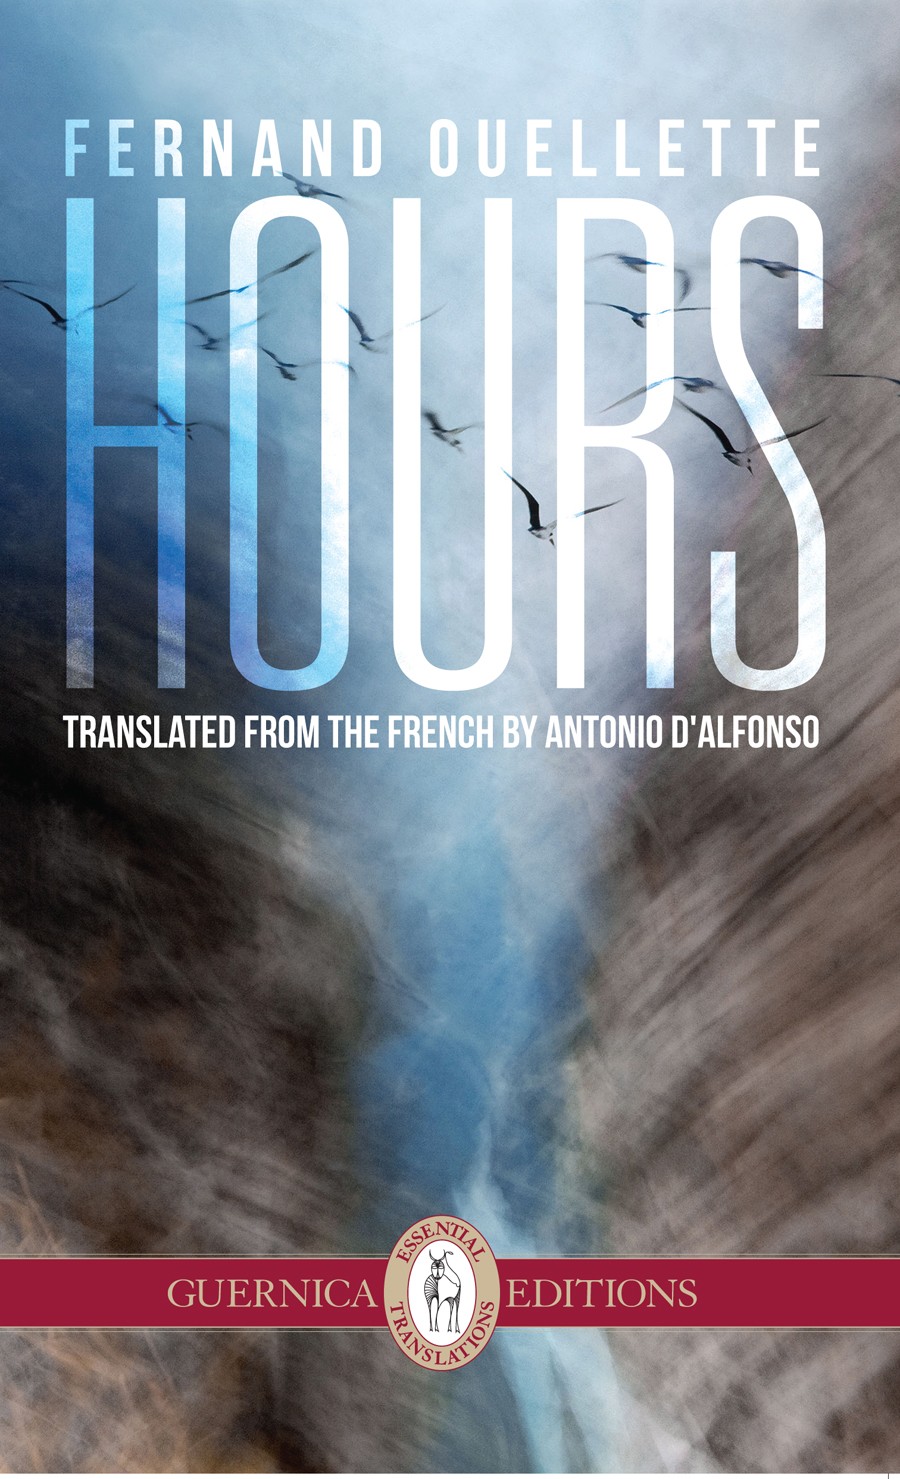 Hours, by Fernand Ouellette